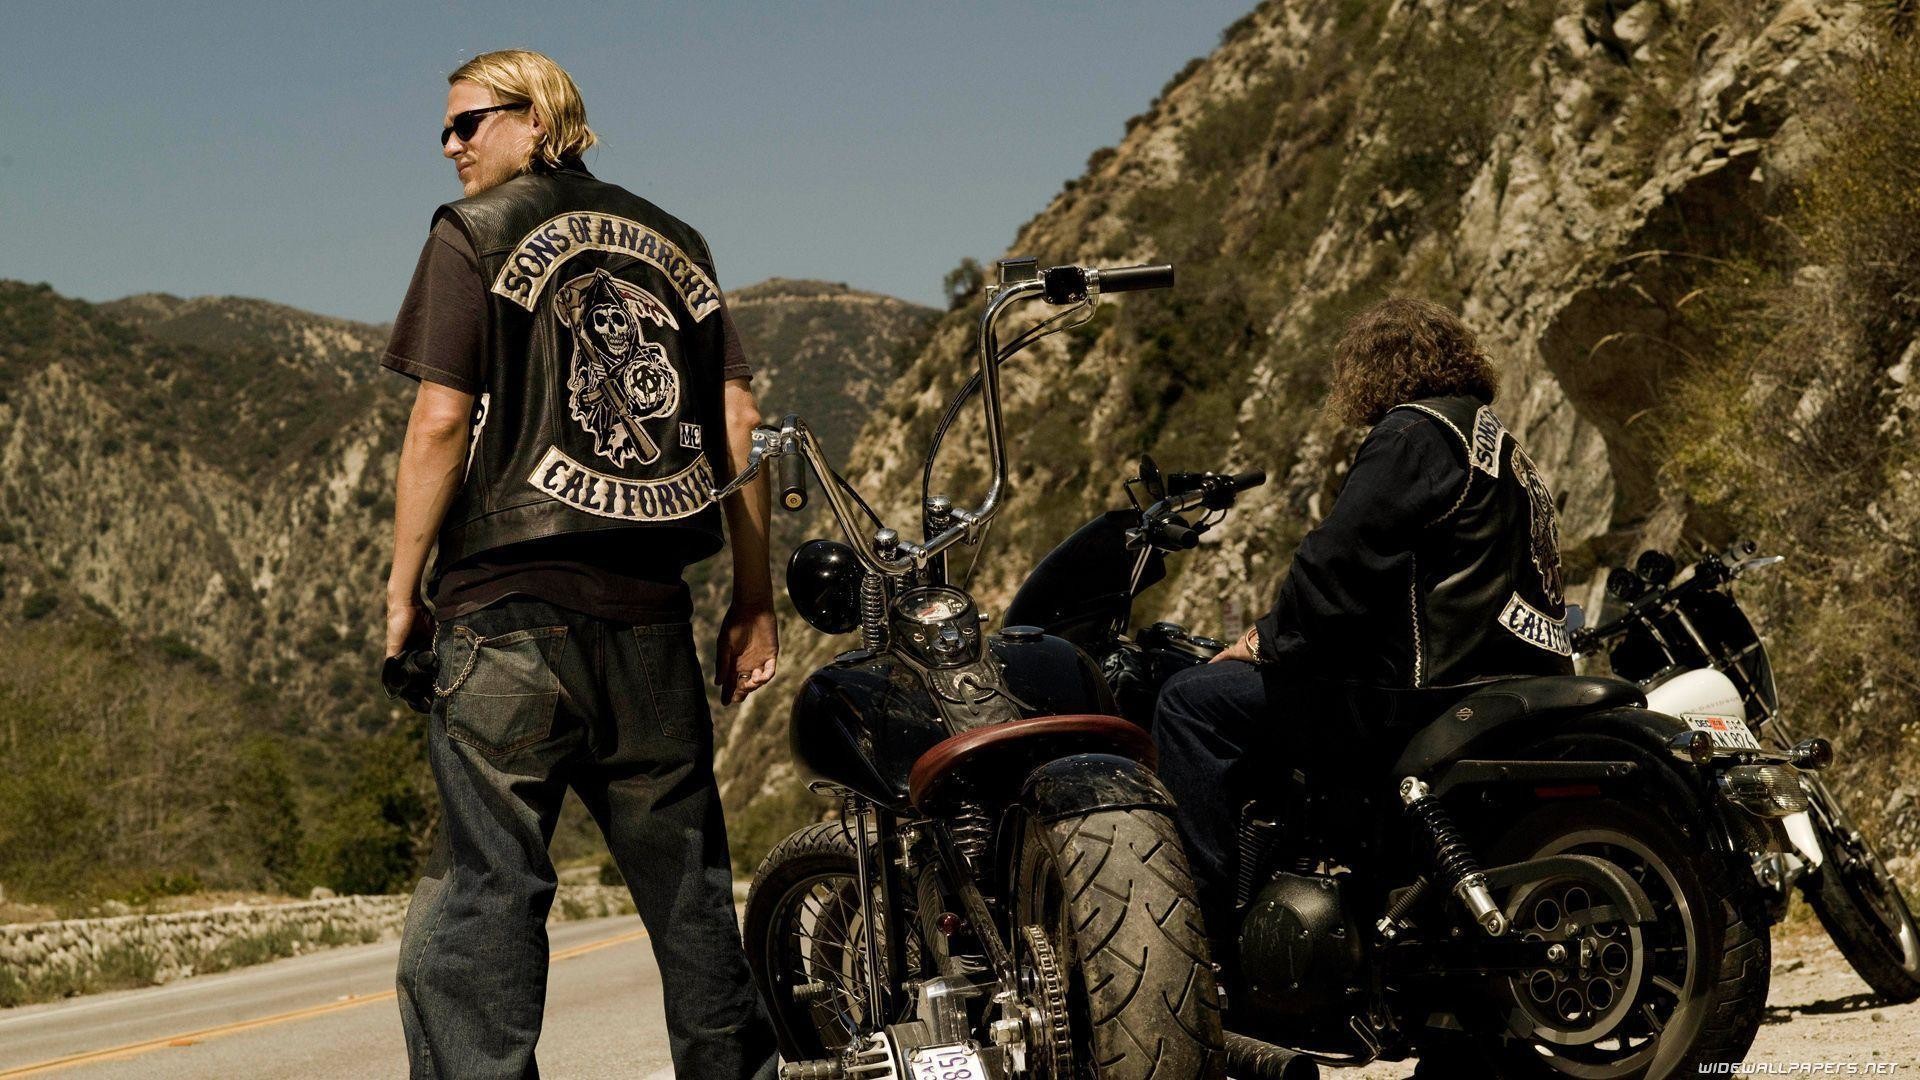 1920x1080 Wide wallpapers and HD wallpapers - Sons of Anarchy wallpapers - 2